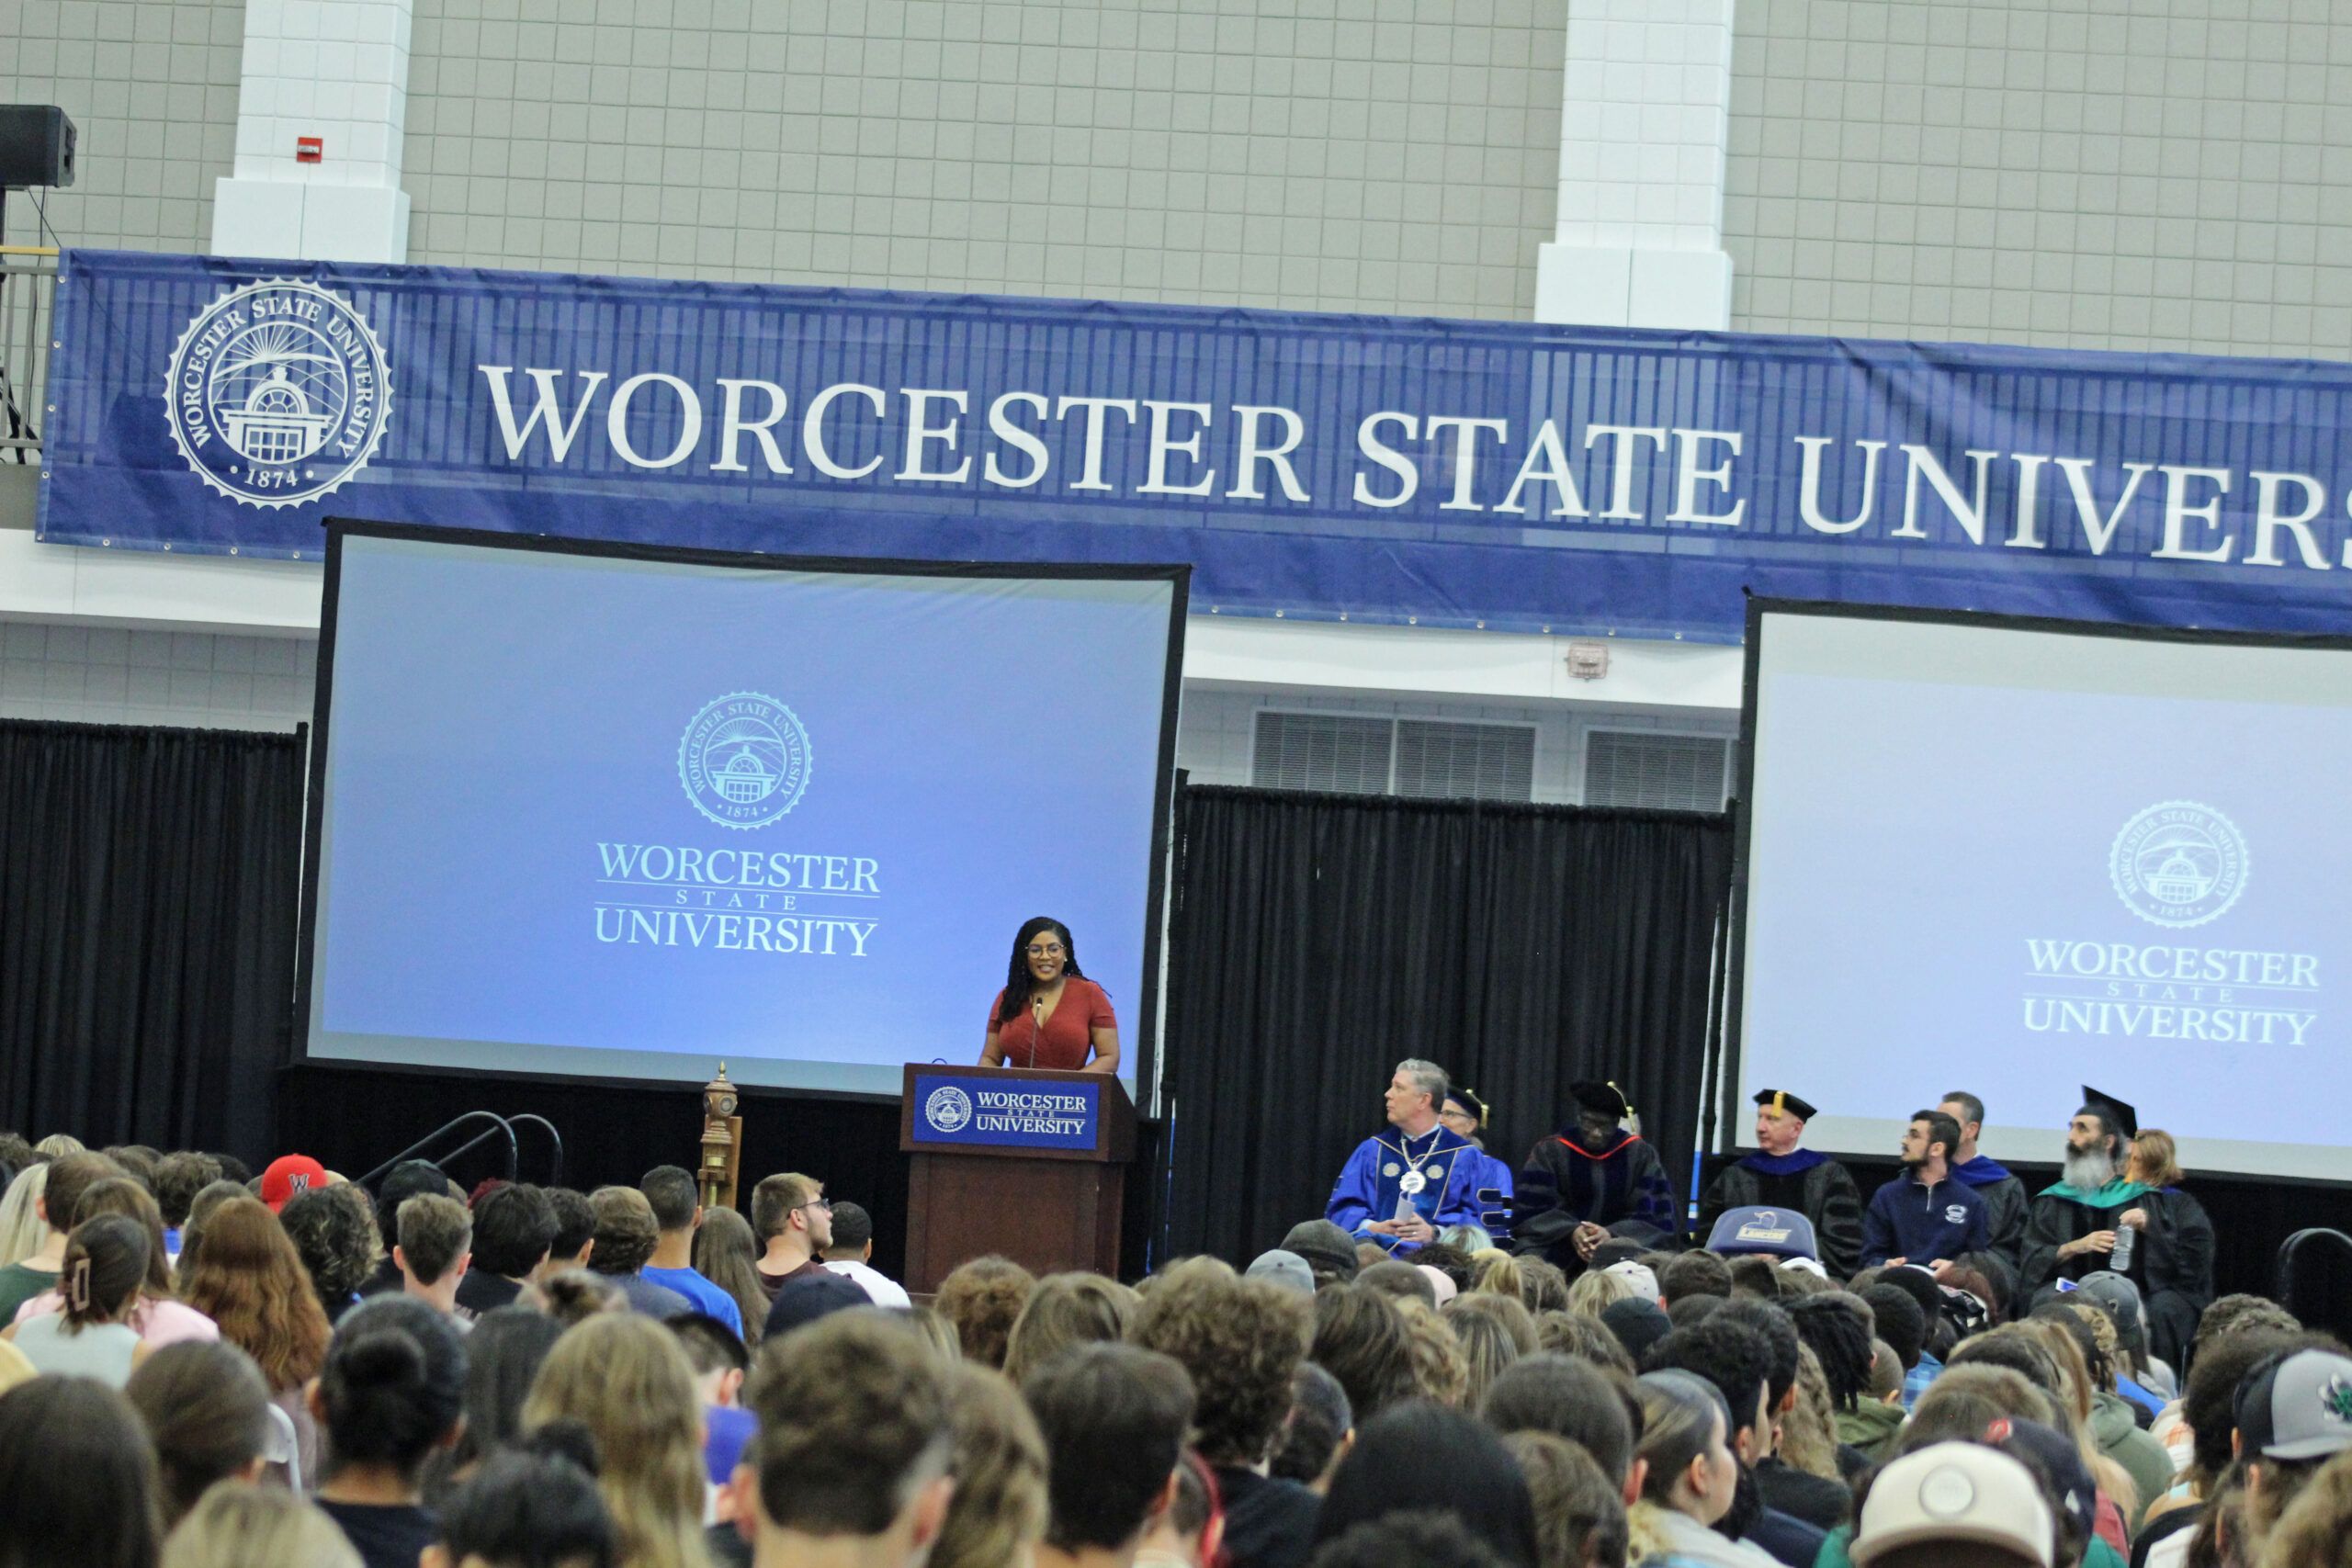 A speaker addresses the audience at Worcester State University's Academic Convocation. Large screens display the university's logo and name, while several seated individuals, some in academic regalia, are on stage.